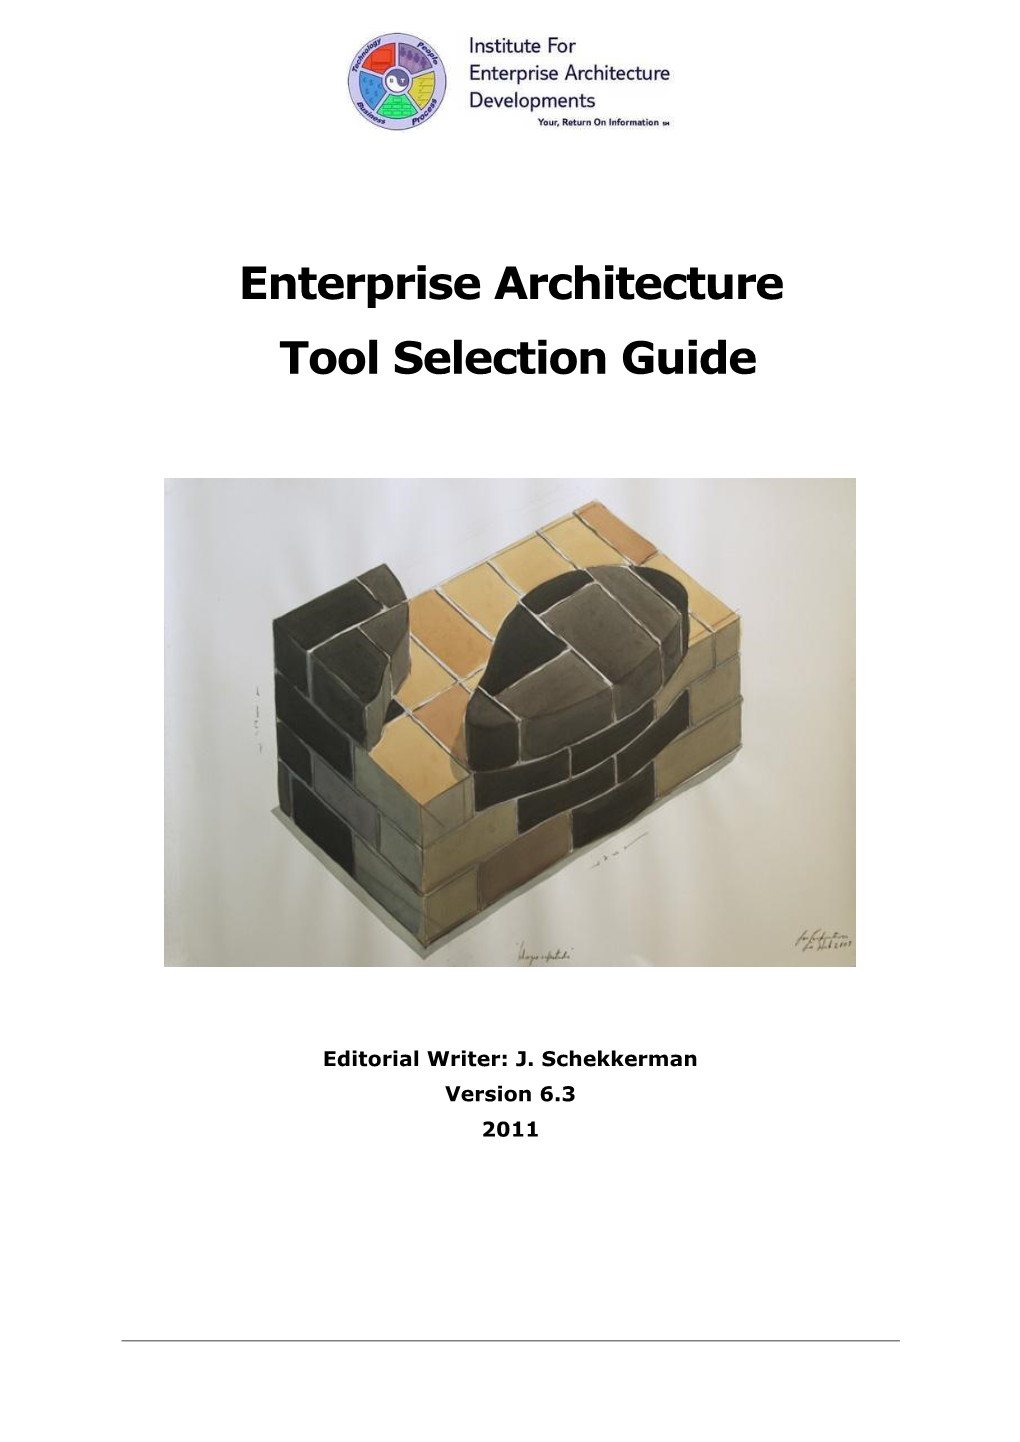 Enterprise Architecture Tool Selection Guide